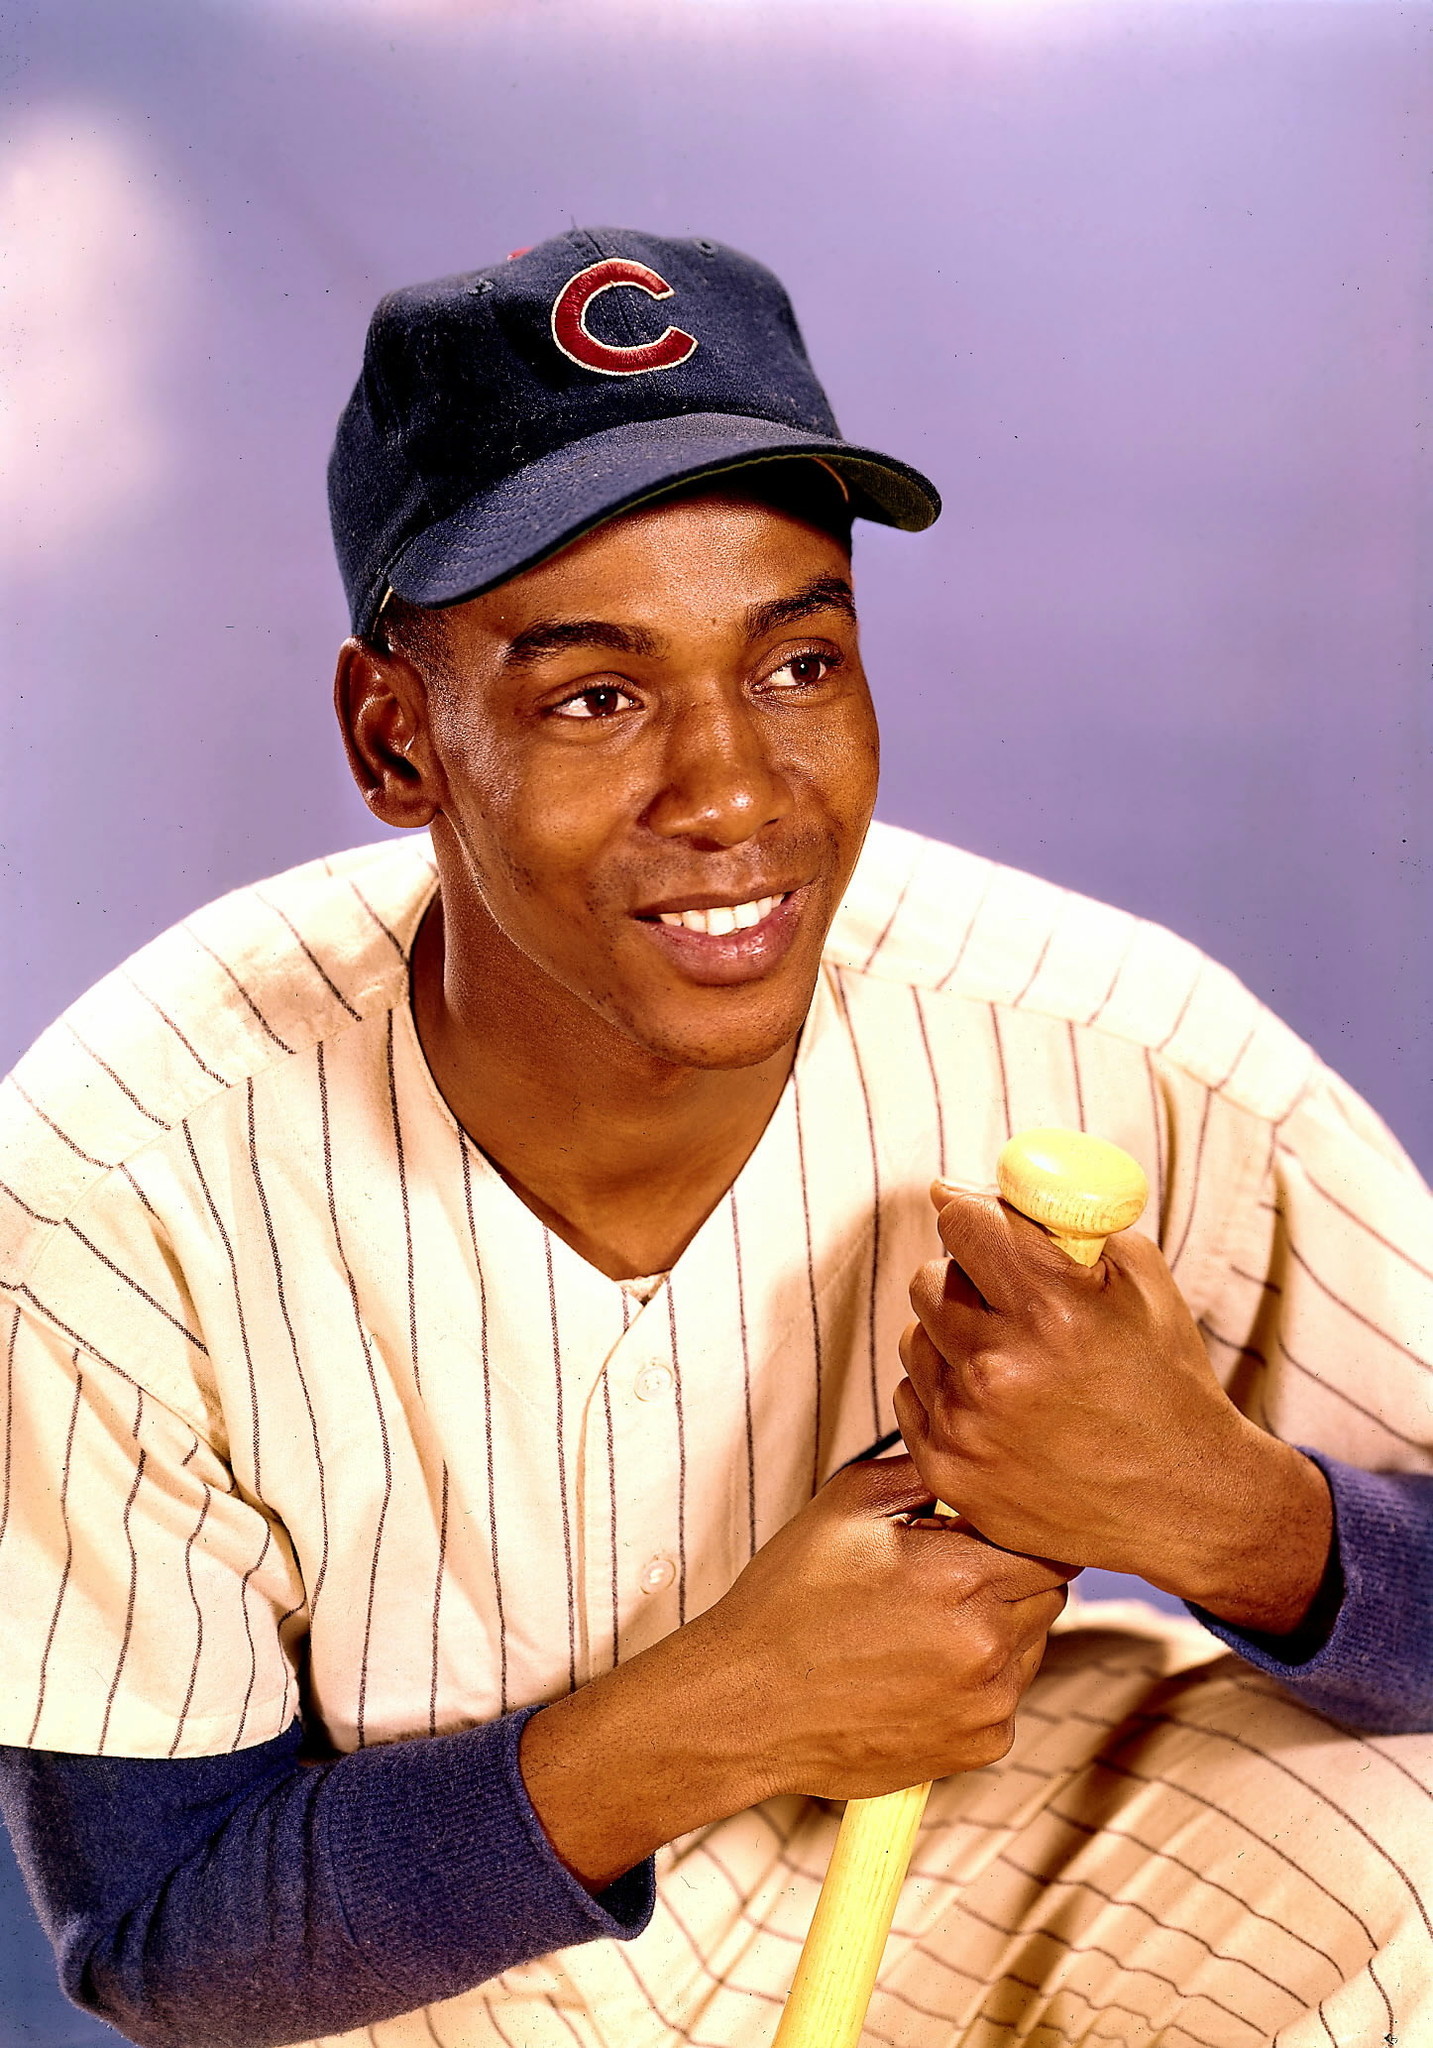 Roundtree portrays Ernie Banks for MLB at Field of Dreams game